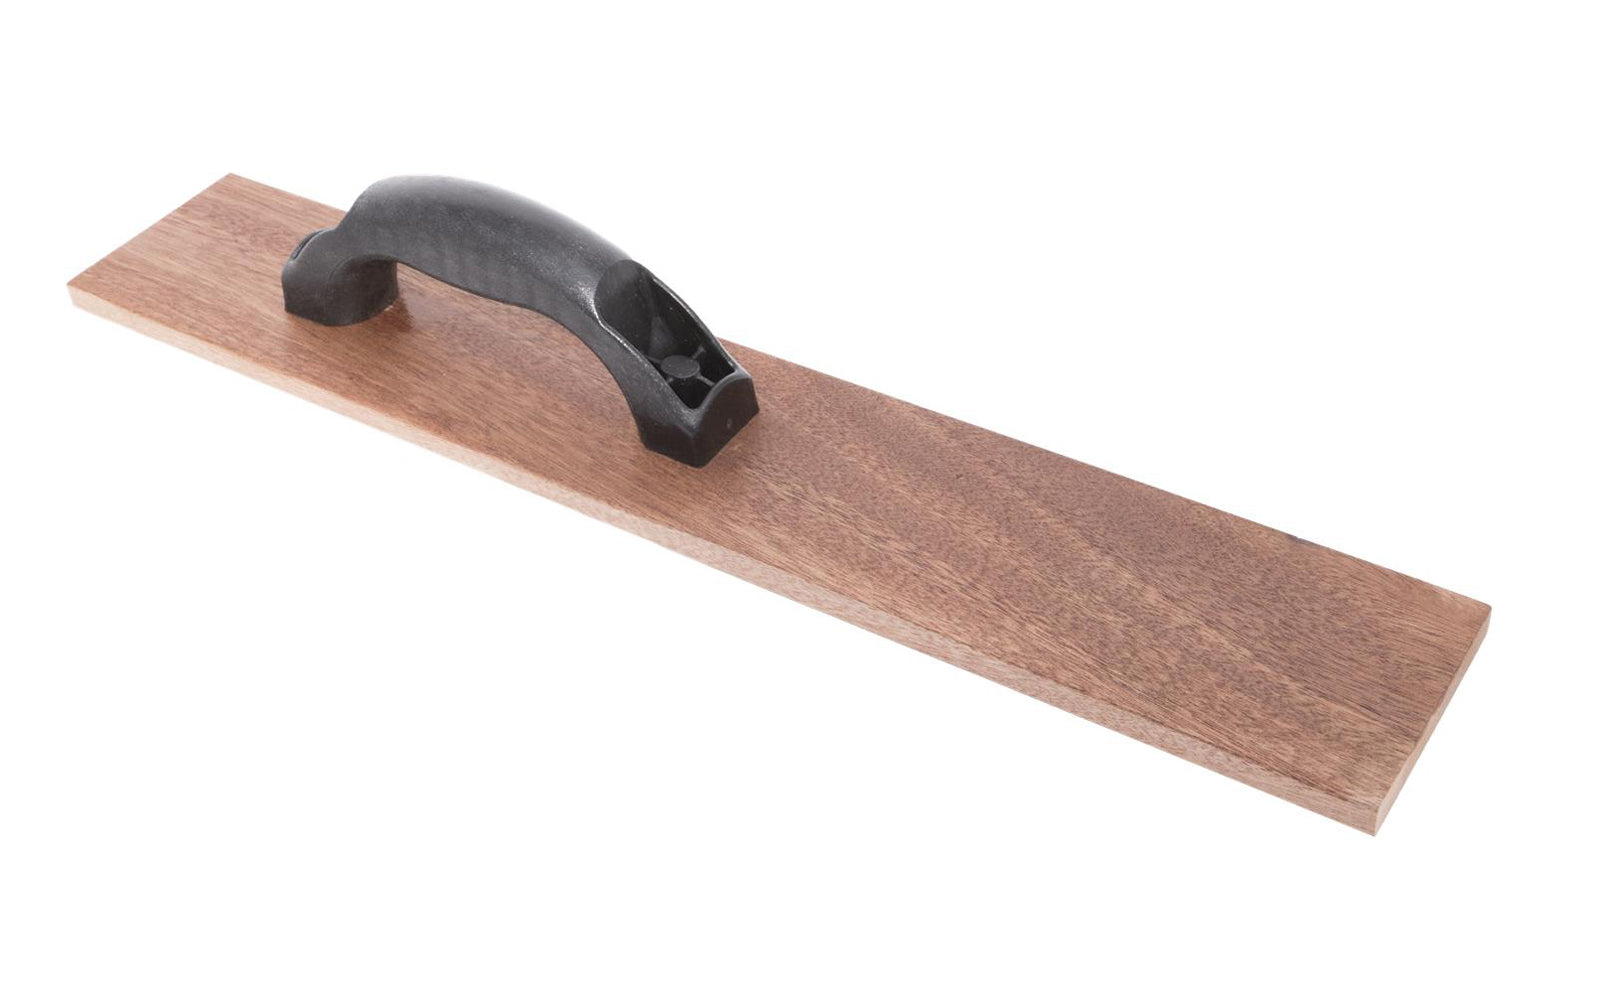 Marshalltown 20" x 3-1/2 QLT Wood Hand Float. Contractor-grade QLT Wood Hand Float made from a 1/2" thick seasoned mahogany. The wood hand floats are ideal for slightly rougher concrete finishes, steps, and working in color hardener. Made in USA ~ Model WF948 ~ 035965045209